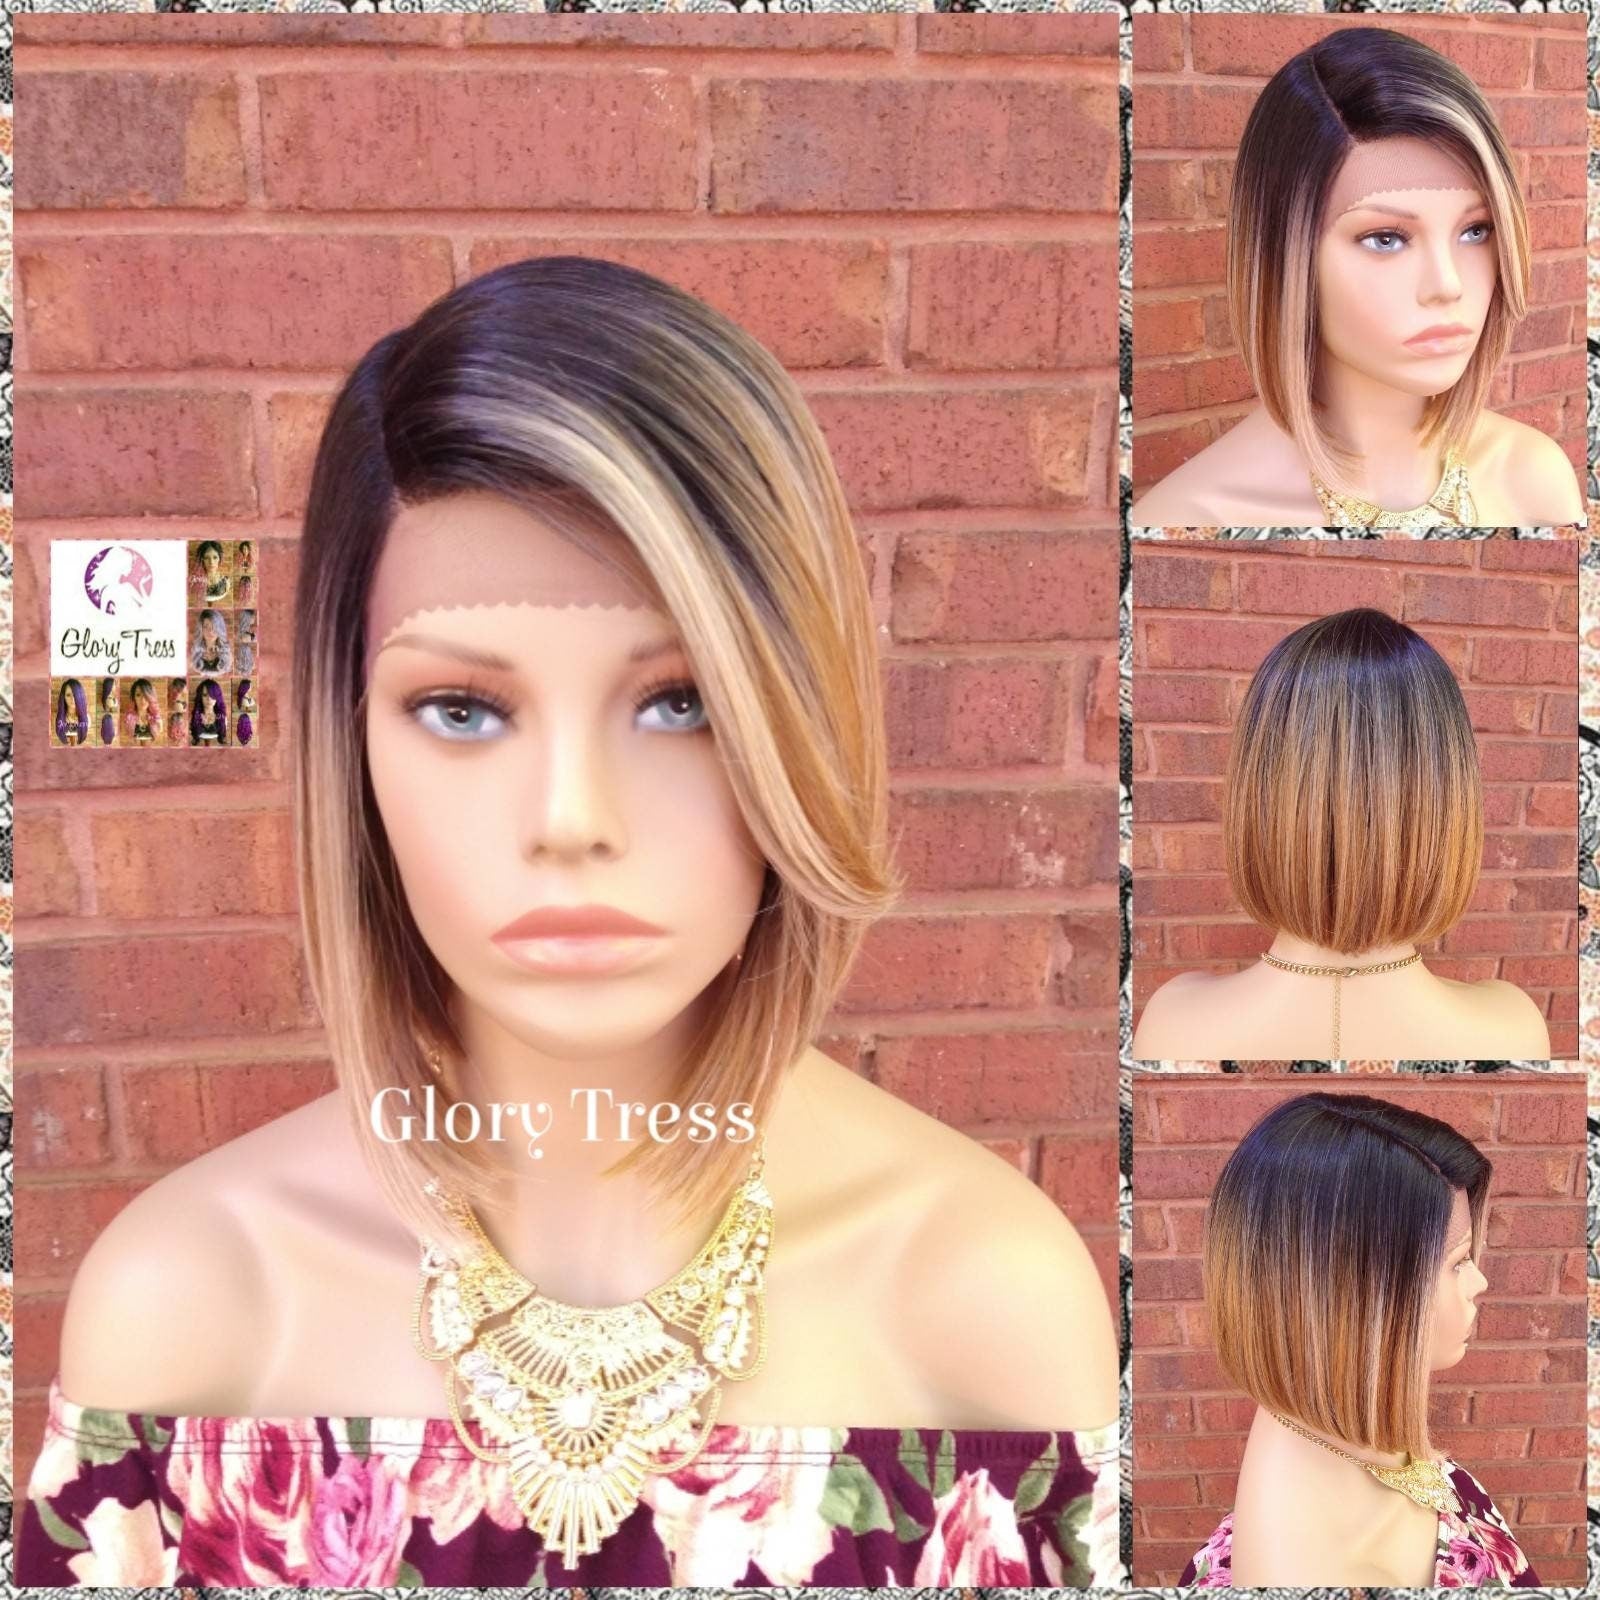 NEW ARRIVAL// Short & Chic Bob Lace Front Wig, Ombre Blonde Wig, Glory Tress, Bob With Bangs, Money Piece Highlights //  BRILLIANT